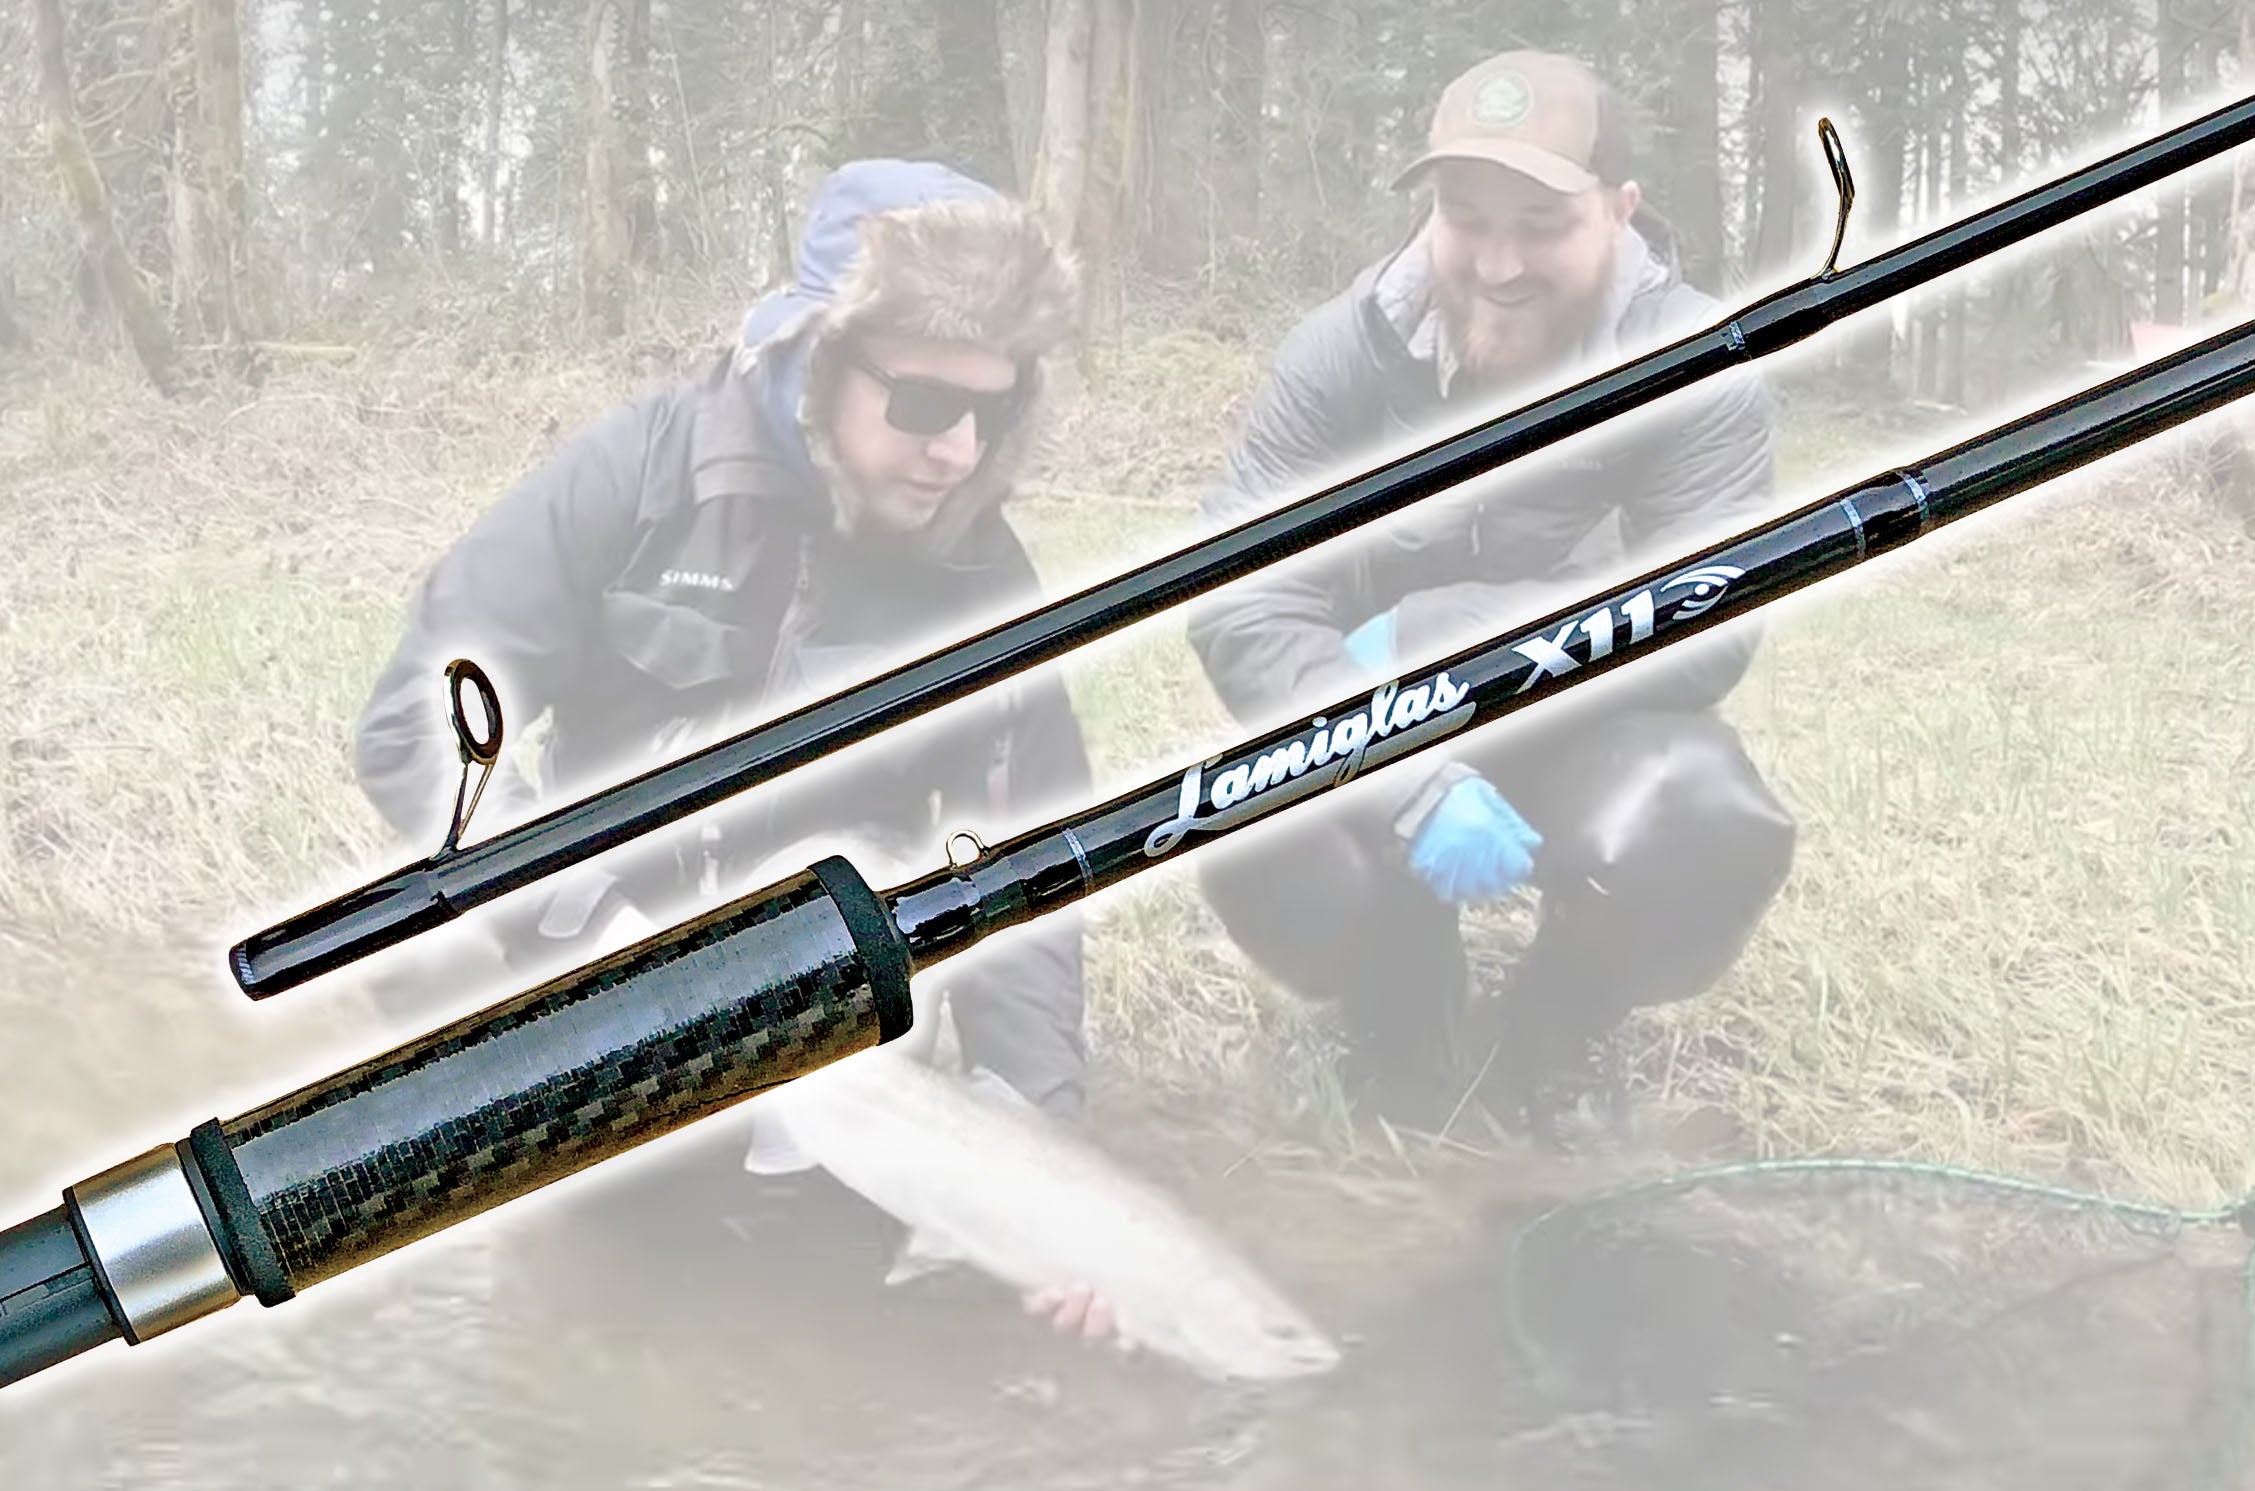 Lamiglas X11 10' 6 Float Rod - PLUS a FREE 2-year subscription to